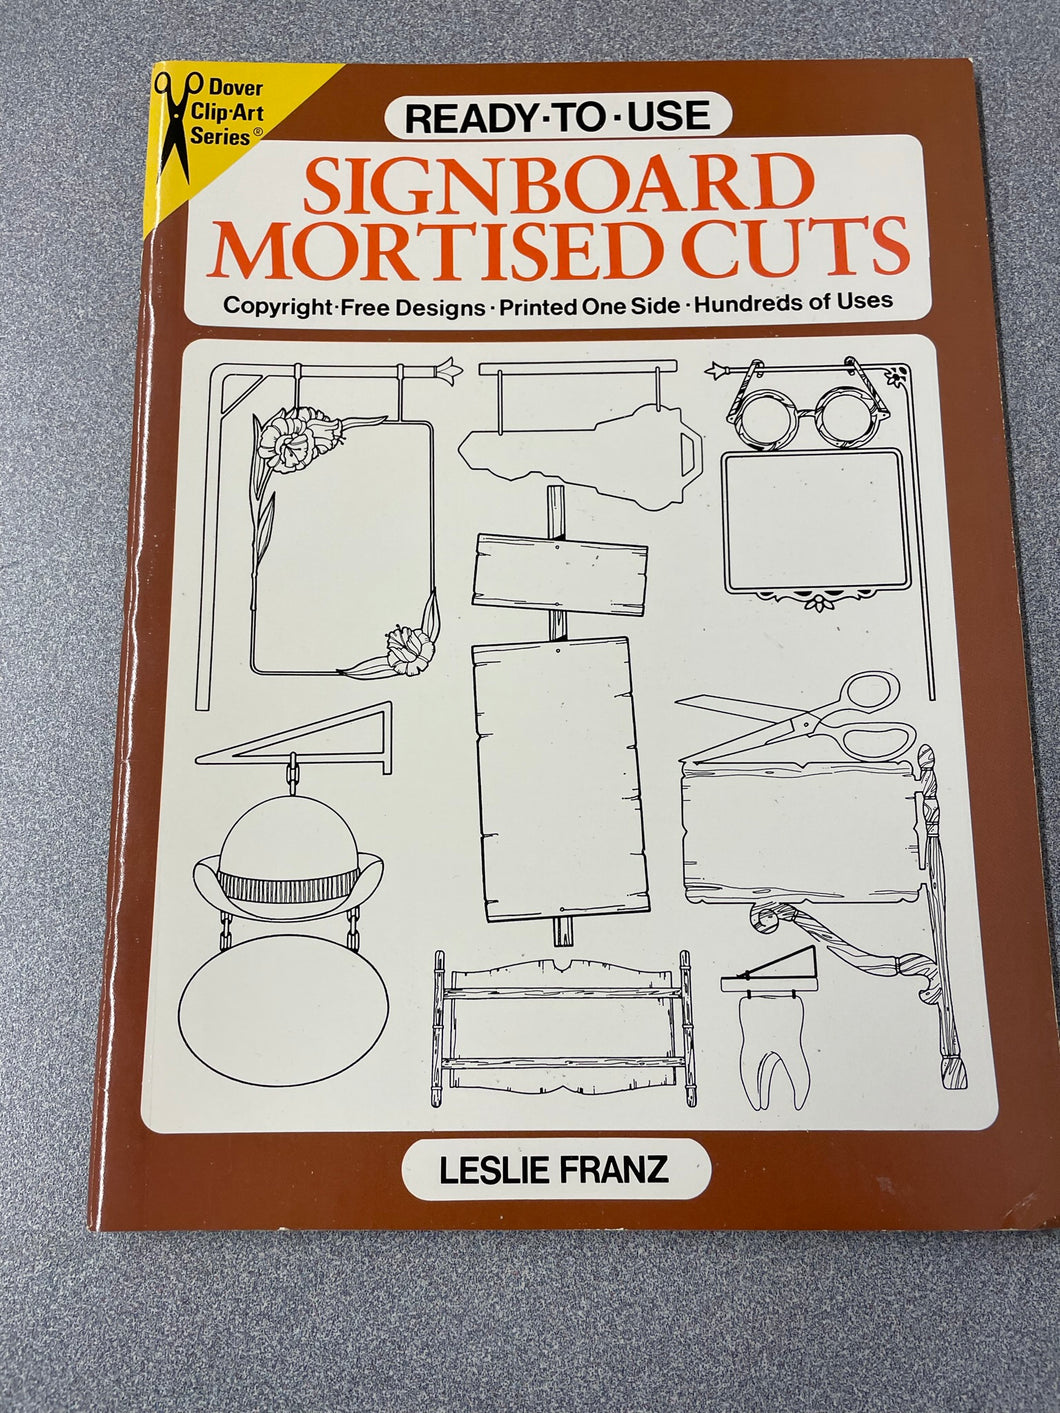 Ready-To-Use Signboard Mortised Cuts: Different Copyright-Free Designs Printed One Side, Hundred of Uses, Franz, Leslie [1991] CG 11/22